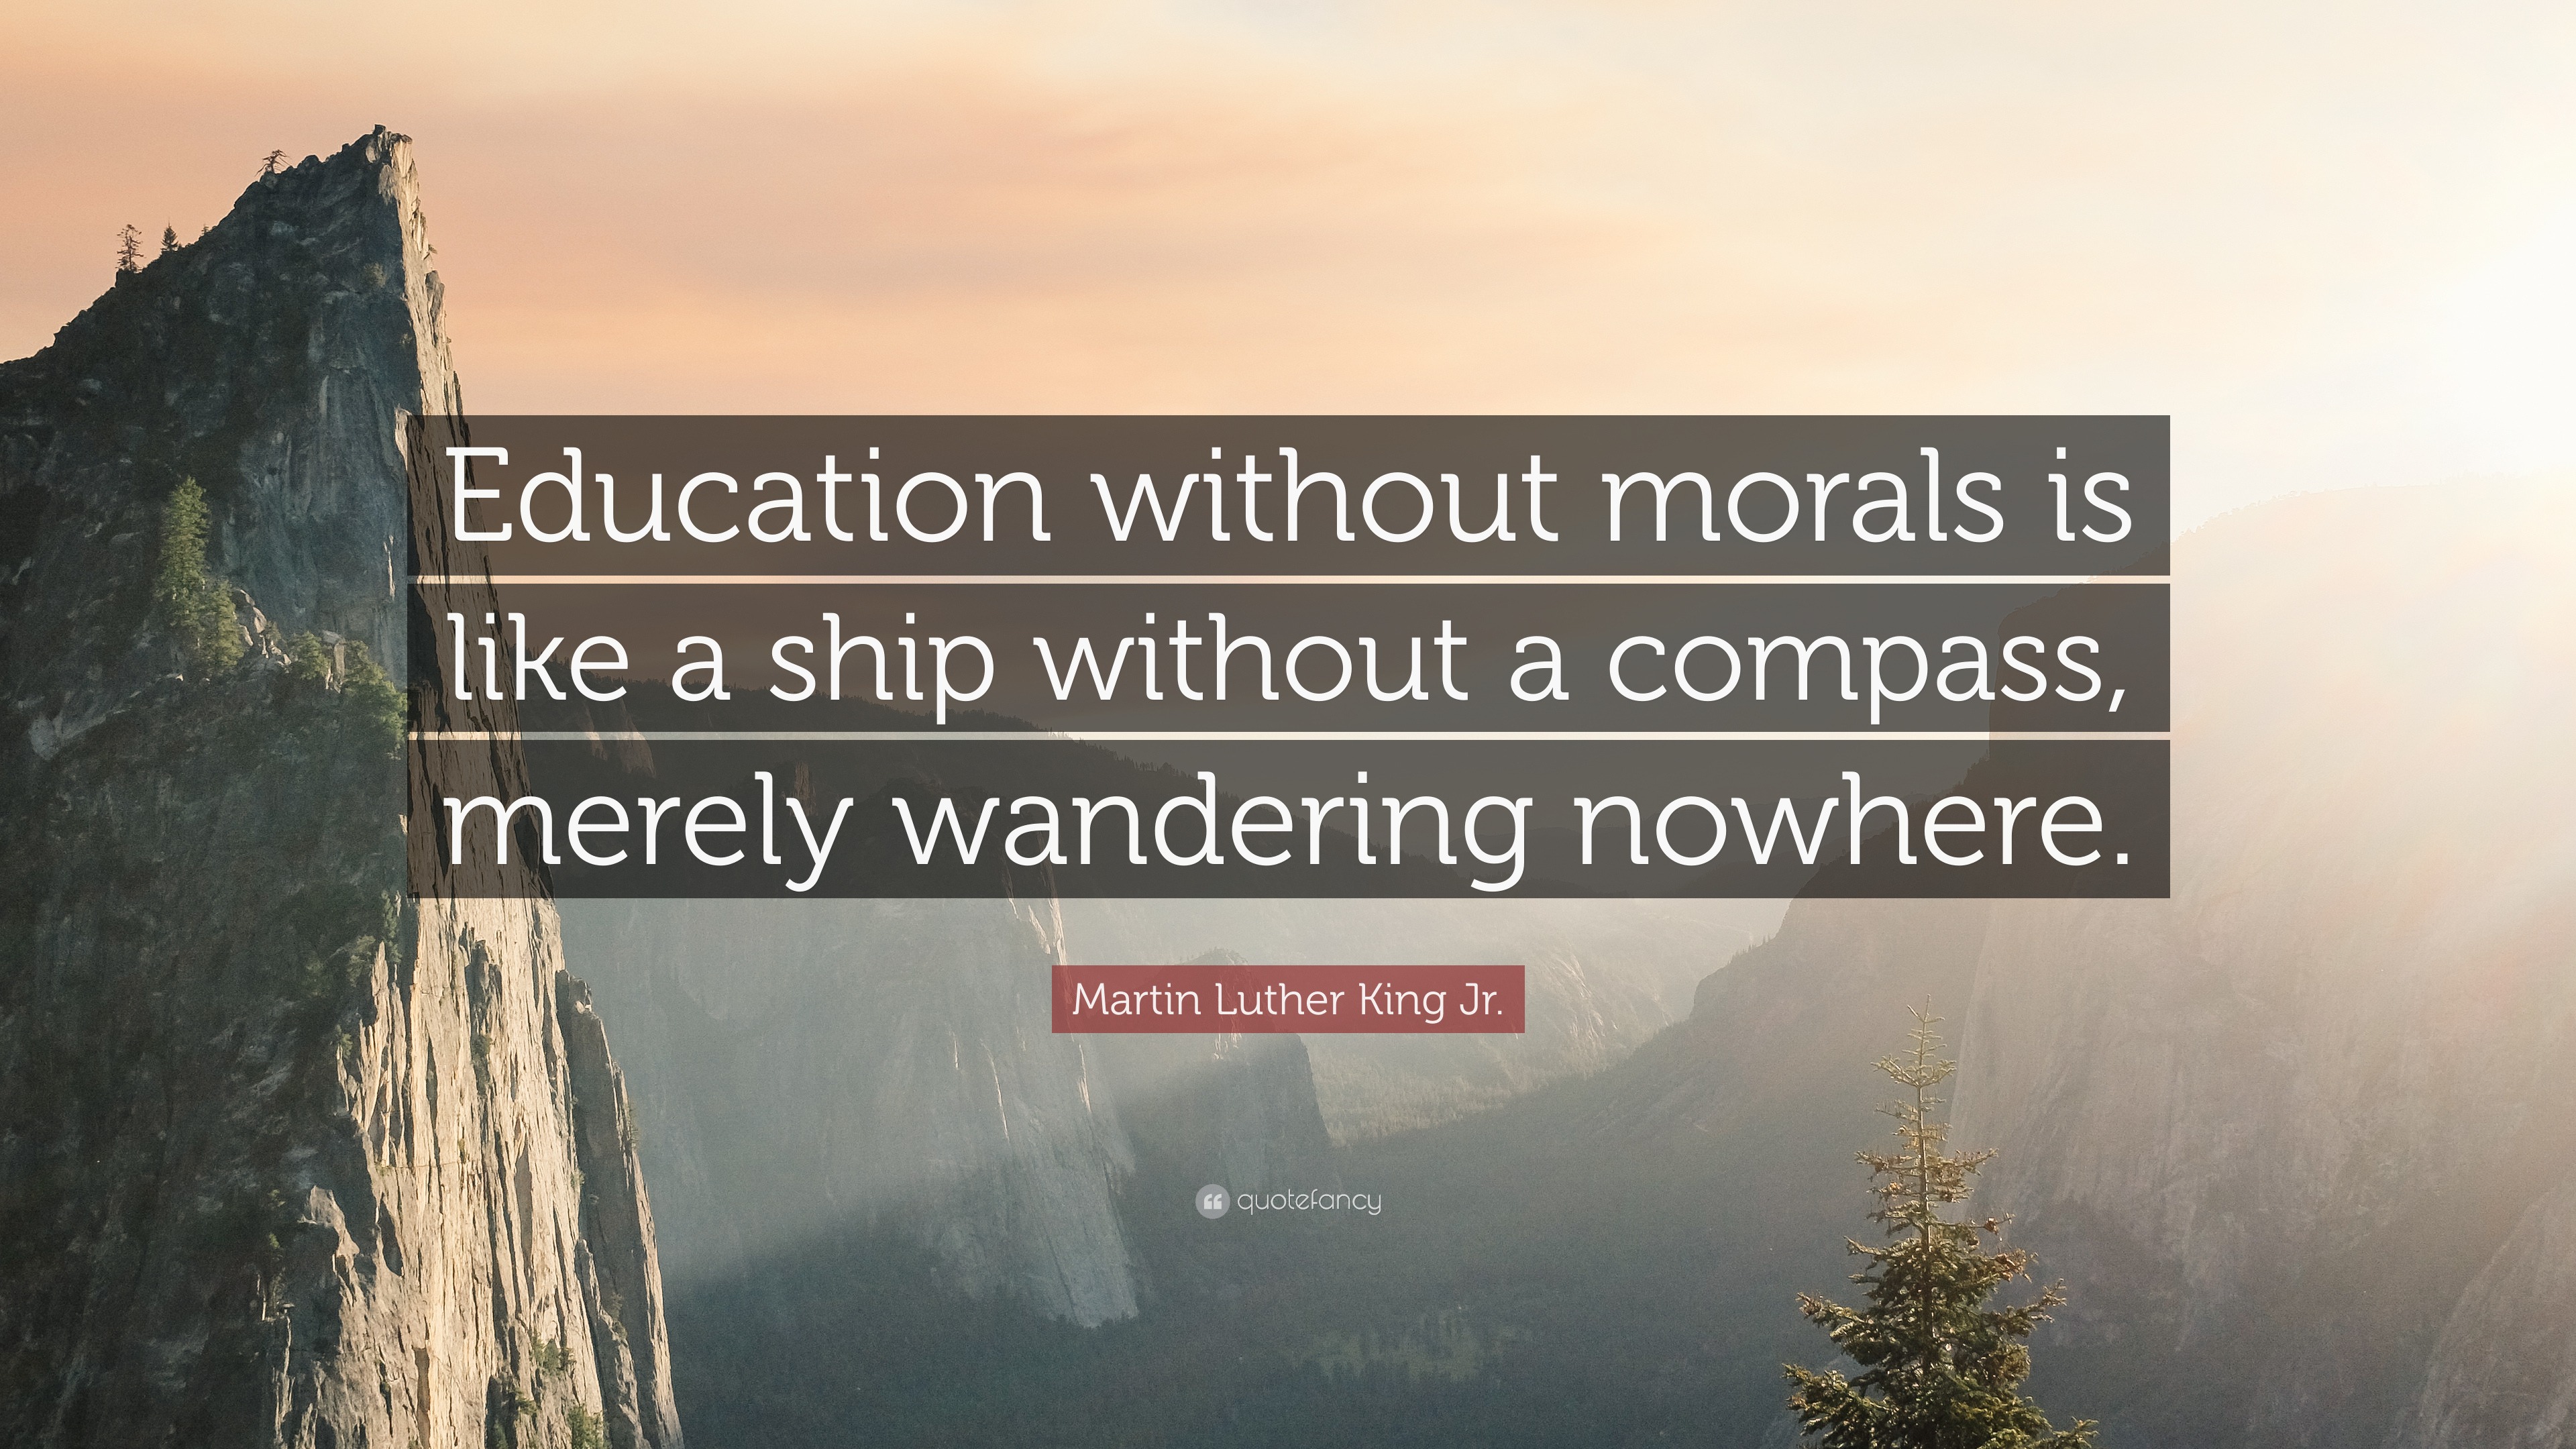 Martin Luther King Jr. Quote “Education without morals is